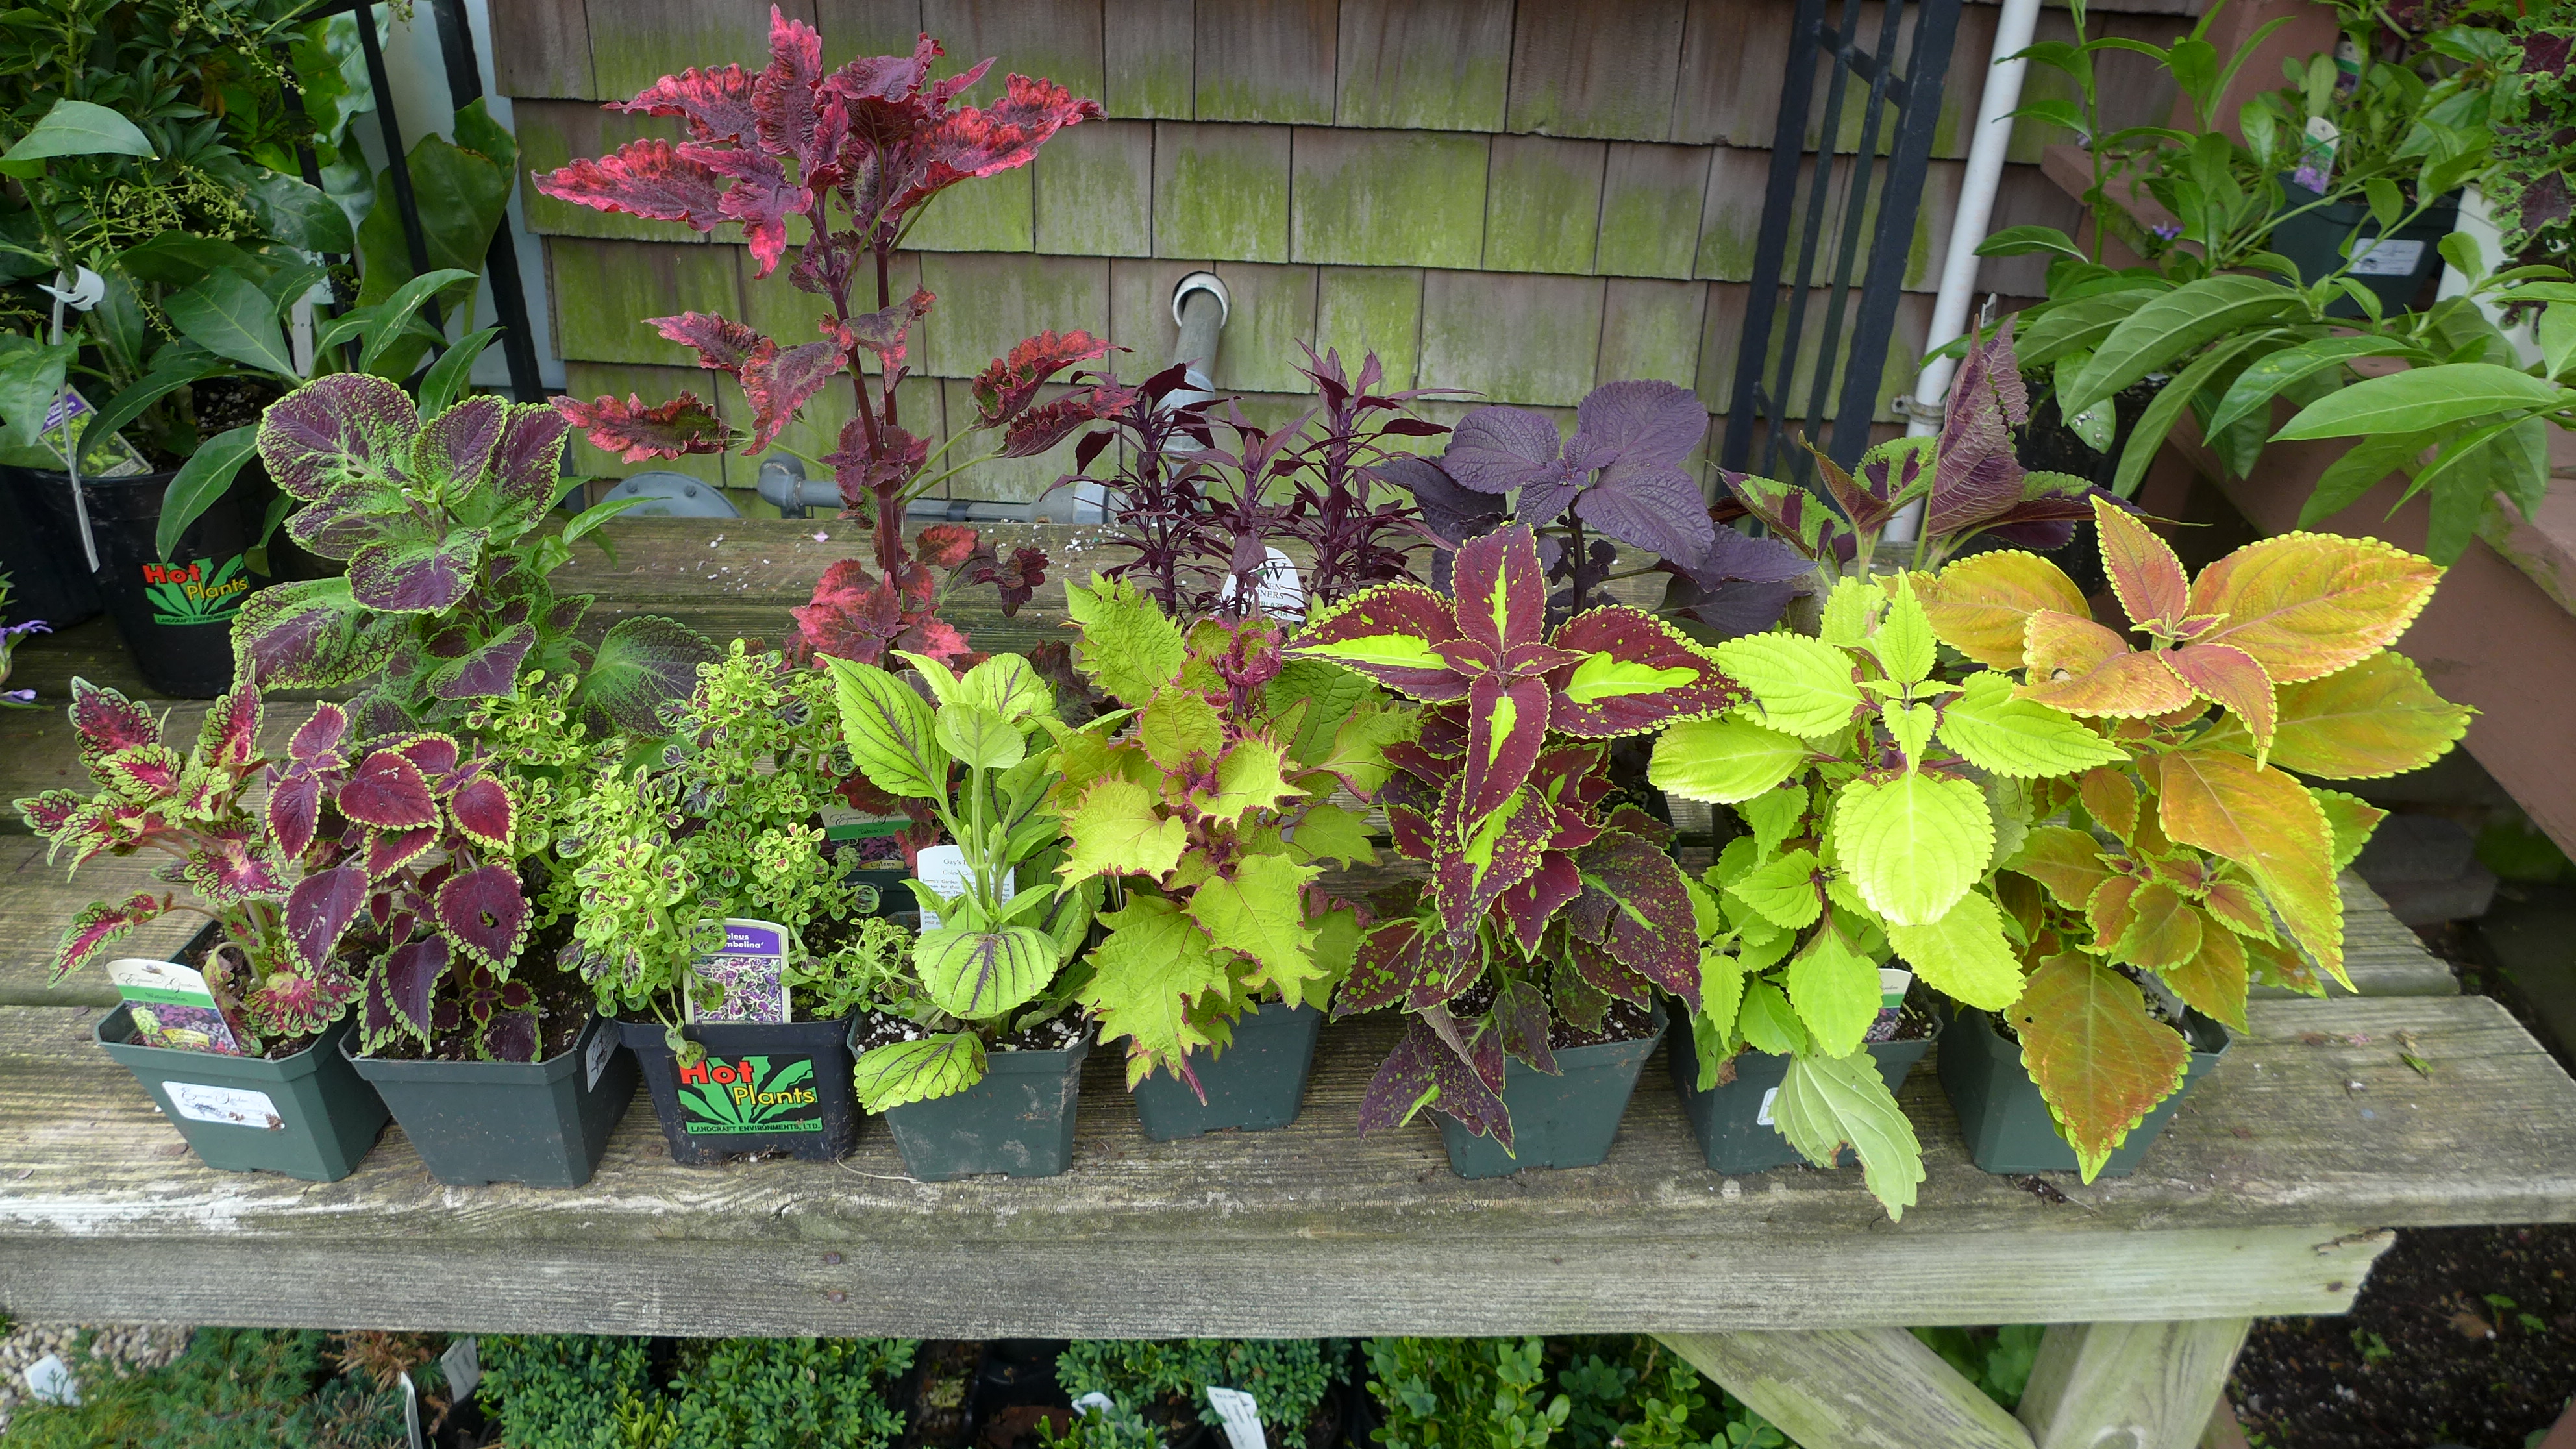 Coleus can make great houseplants in bright light, and nearly 20 varieties are available. The taller red plant in the back left would be a great candidate for a "standard" when trimmed back to a single stem and with the lower foliage removed. ANDREW MESSINGER